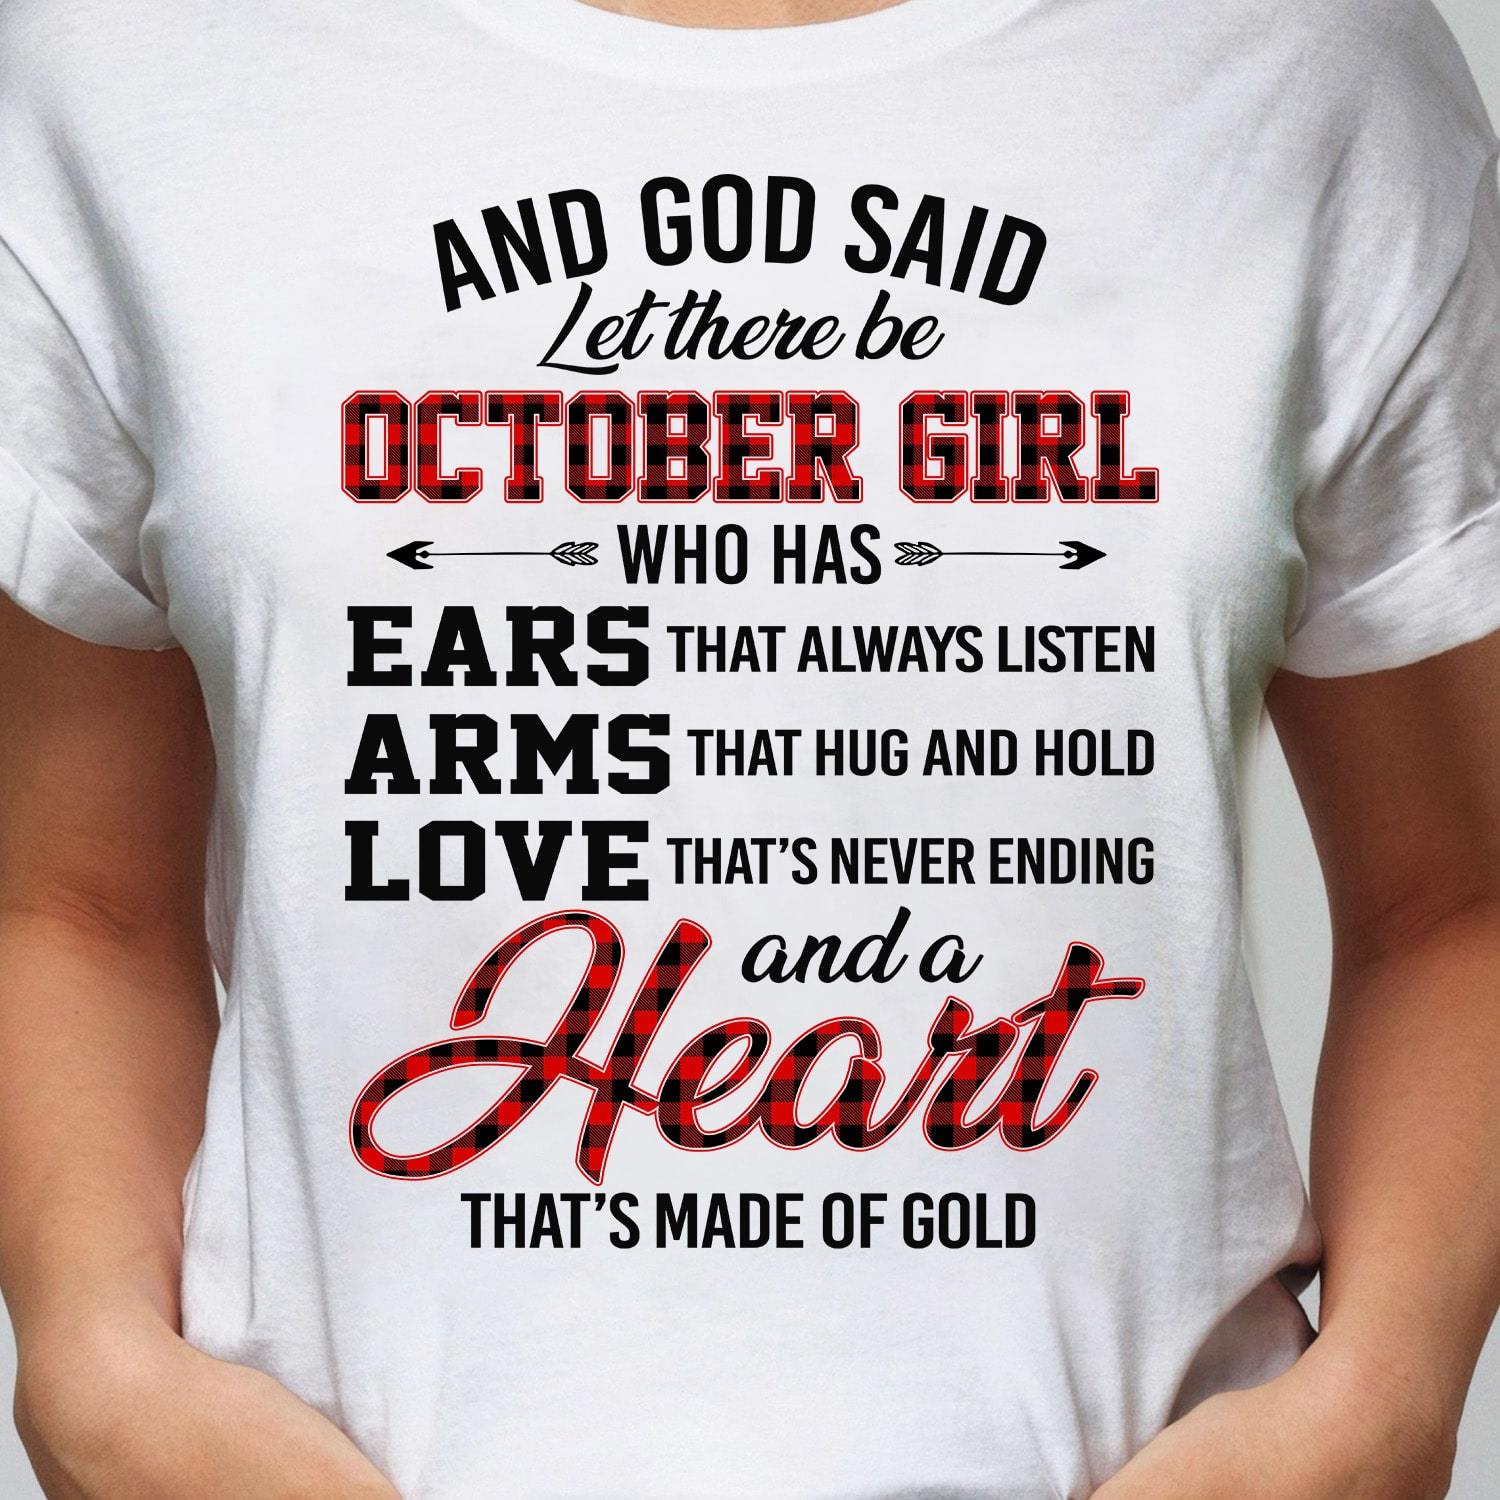 October Girl – And God said let there be – Jesus T Shirt